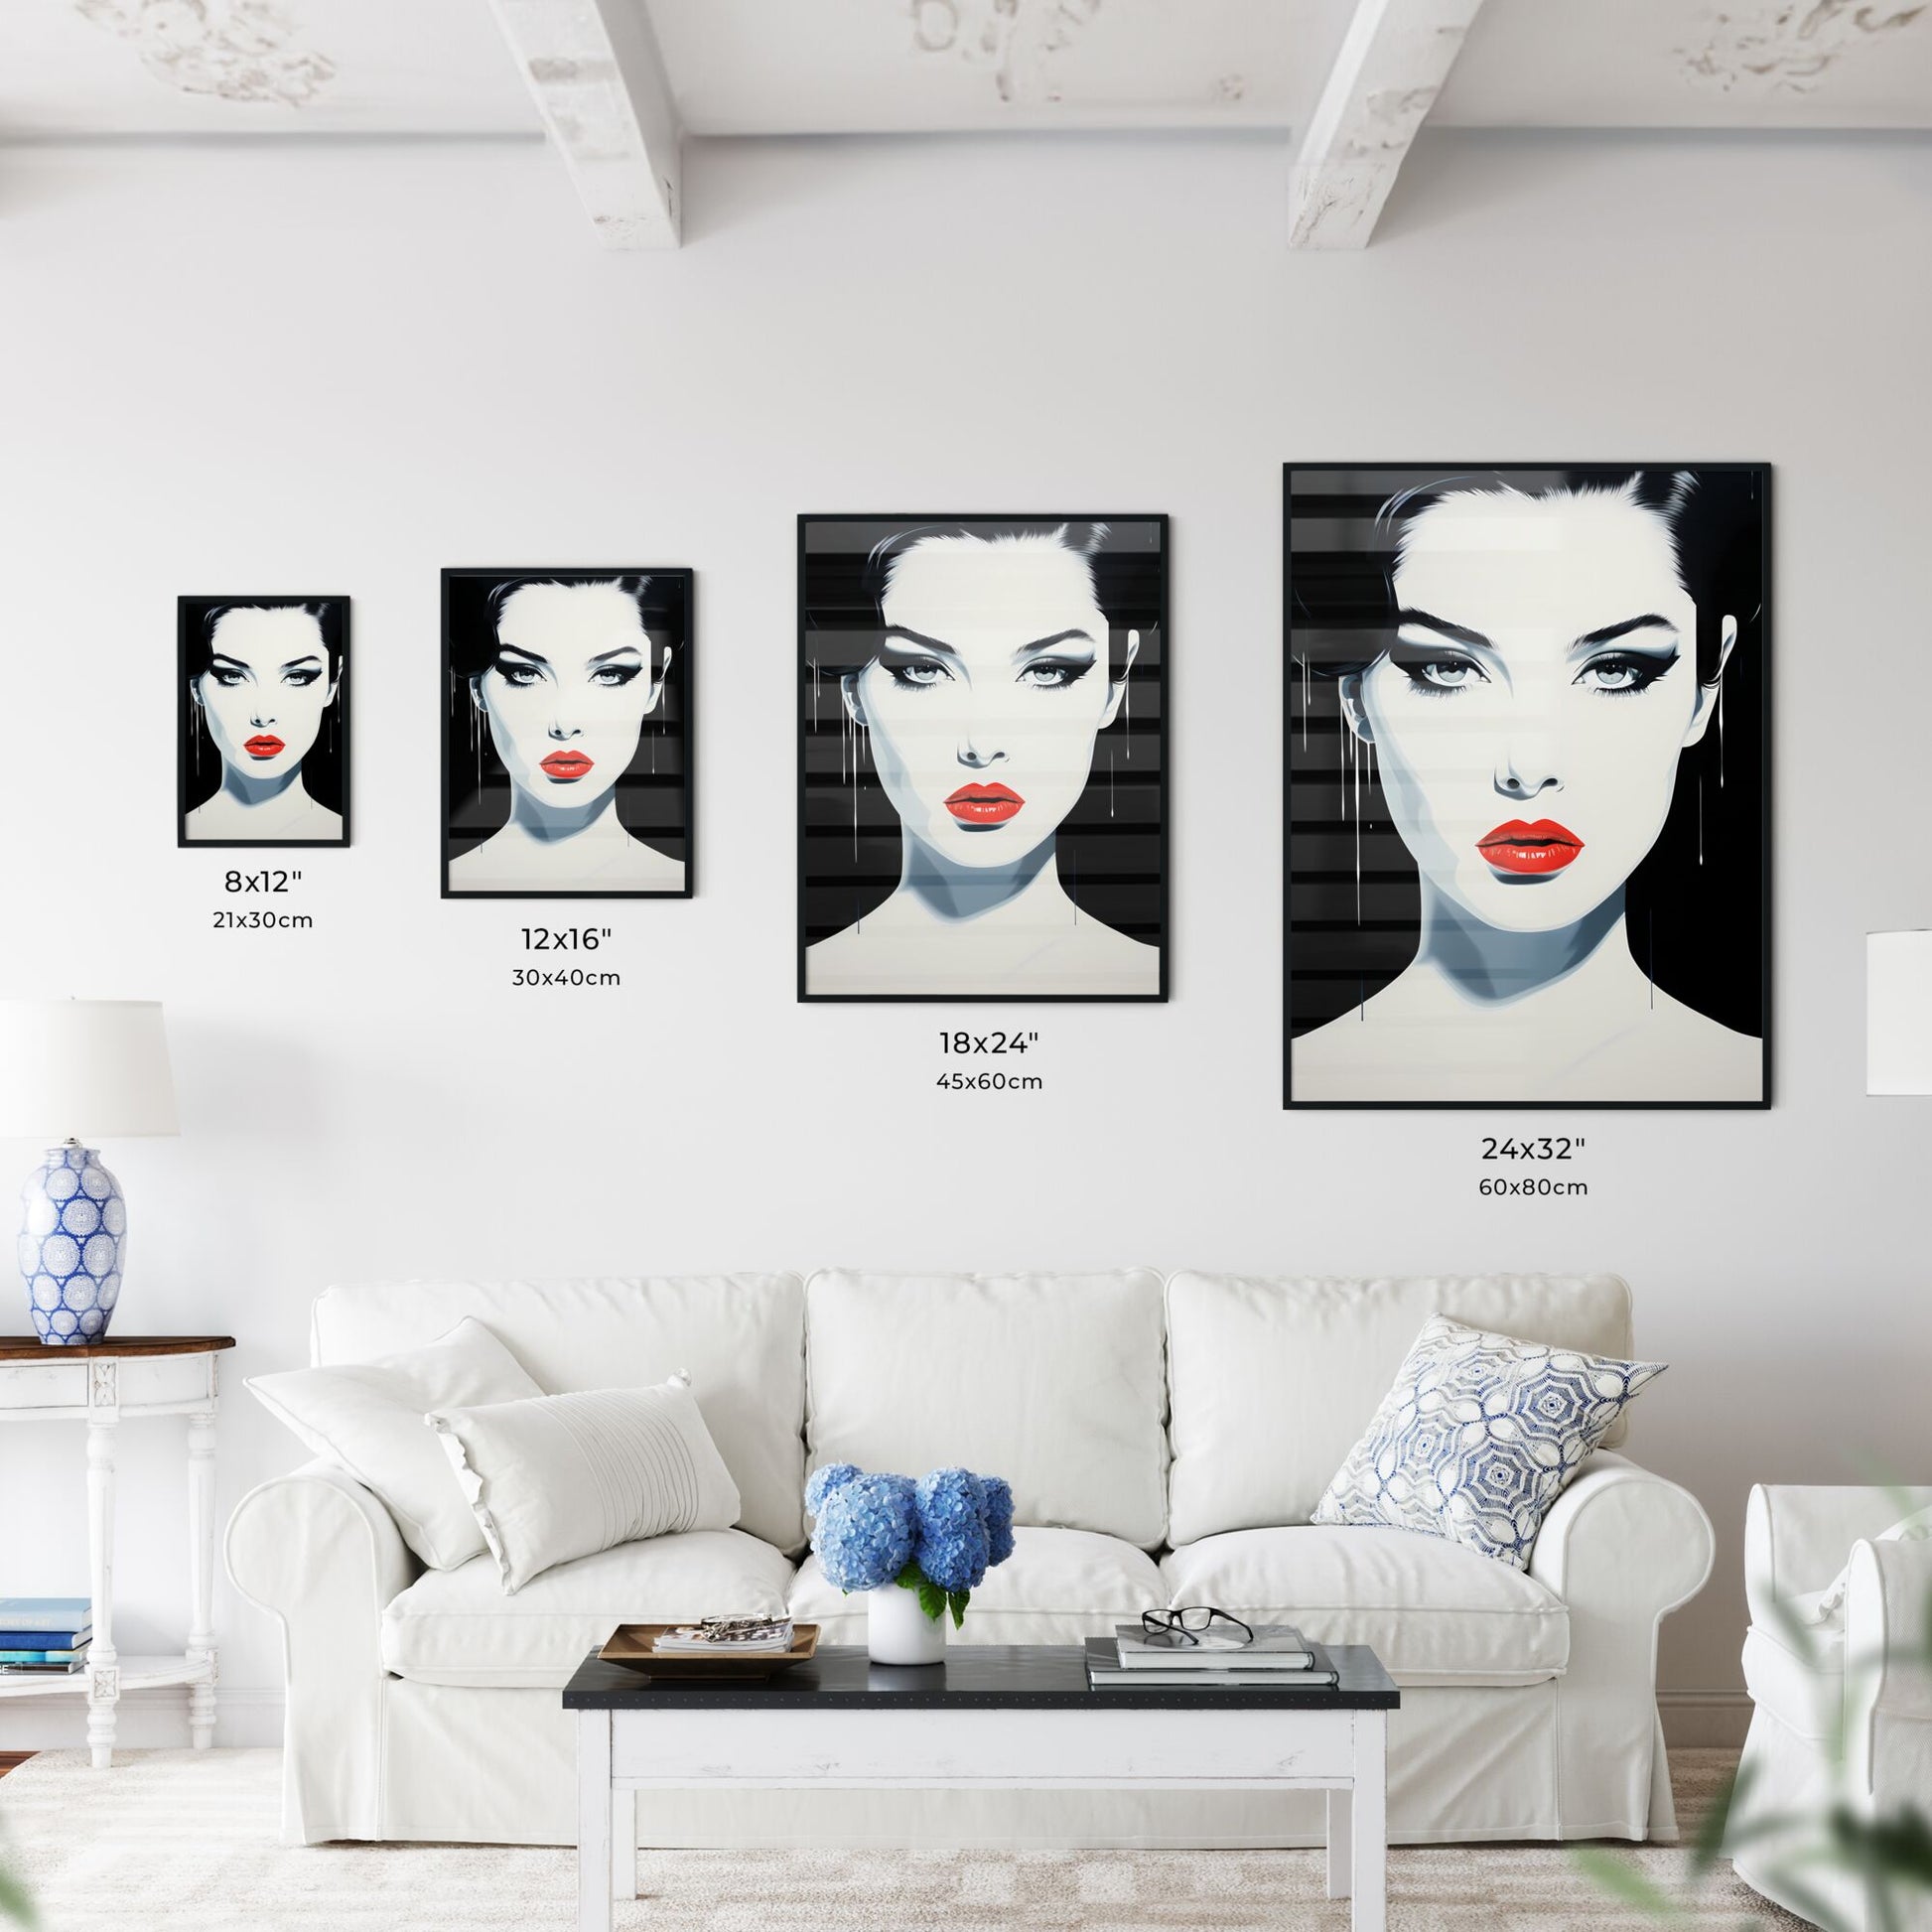 A Poster of Illustration Manga - A Woman With Red Lips And Black Hair Default Title